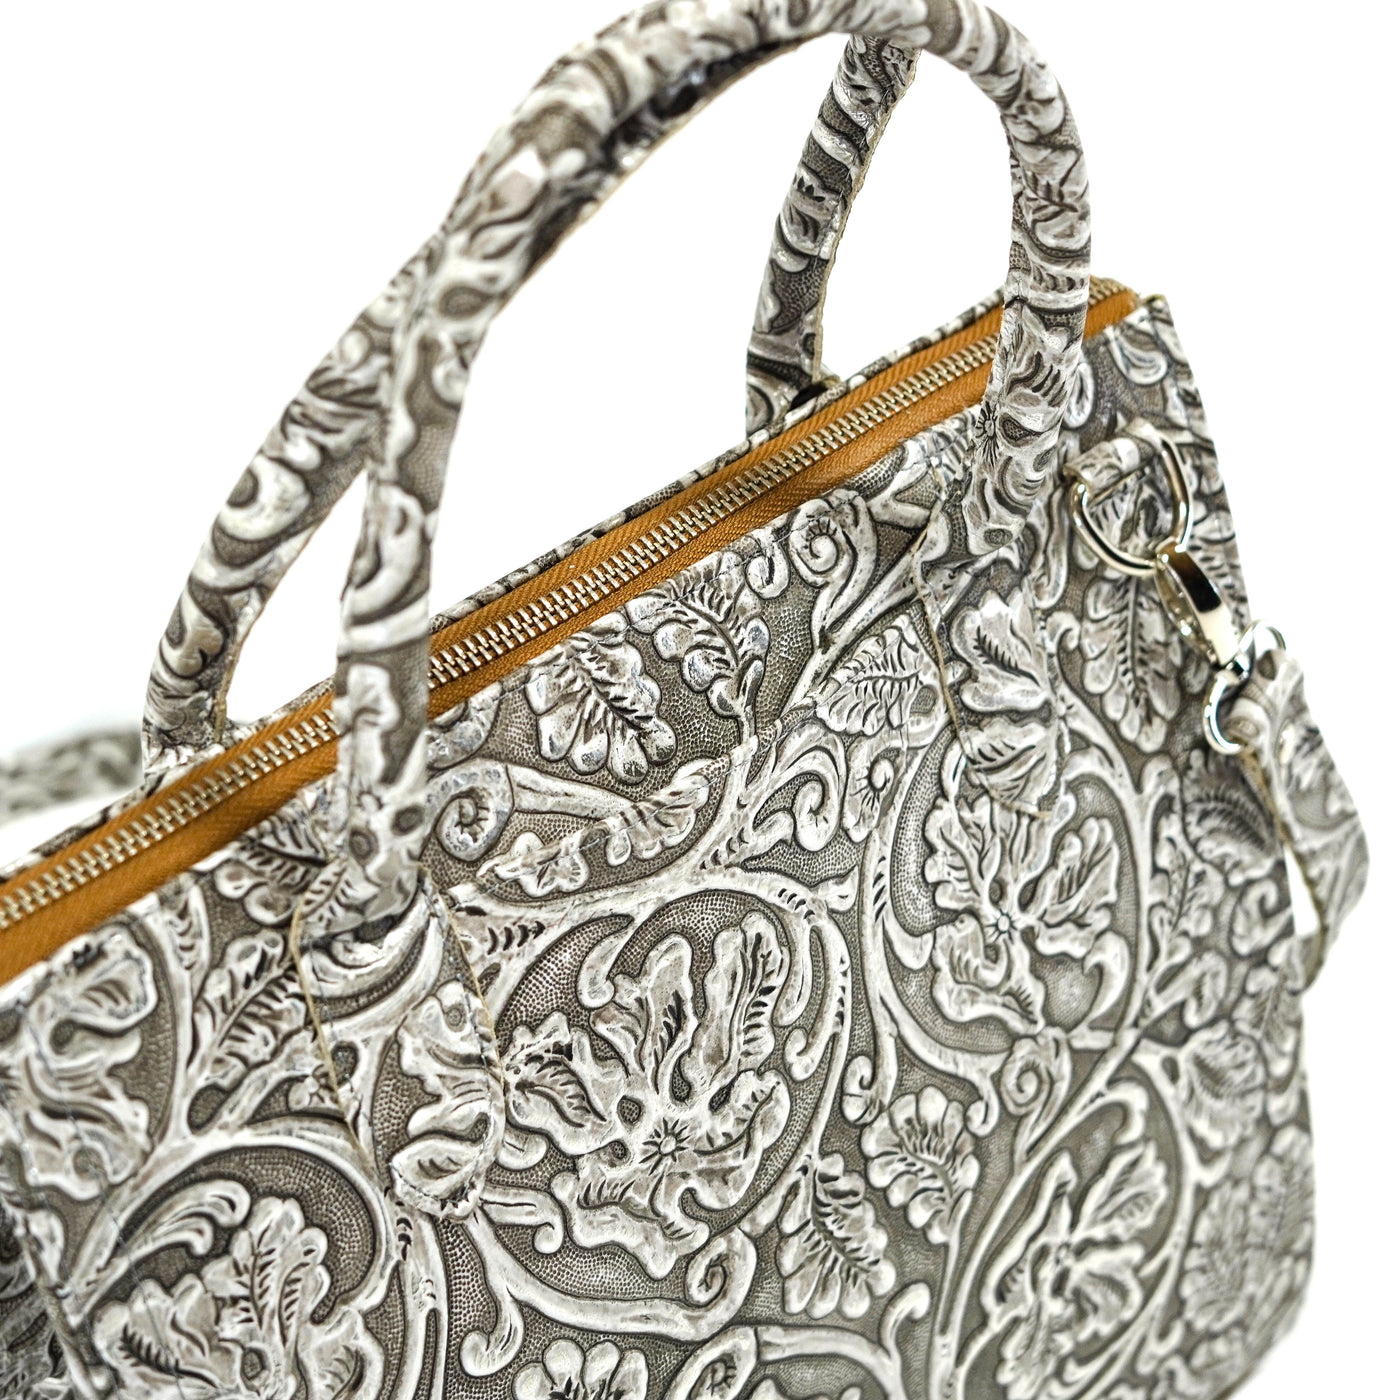 The Opry - All Embossed w/ Silver Tool-The Opry-Western-Cowhide-Bags-Handmade-Products-Gifts-Dancing Cactus Designs